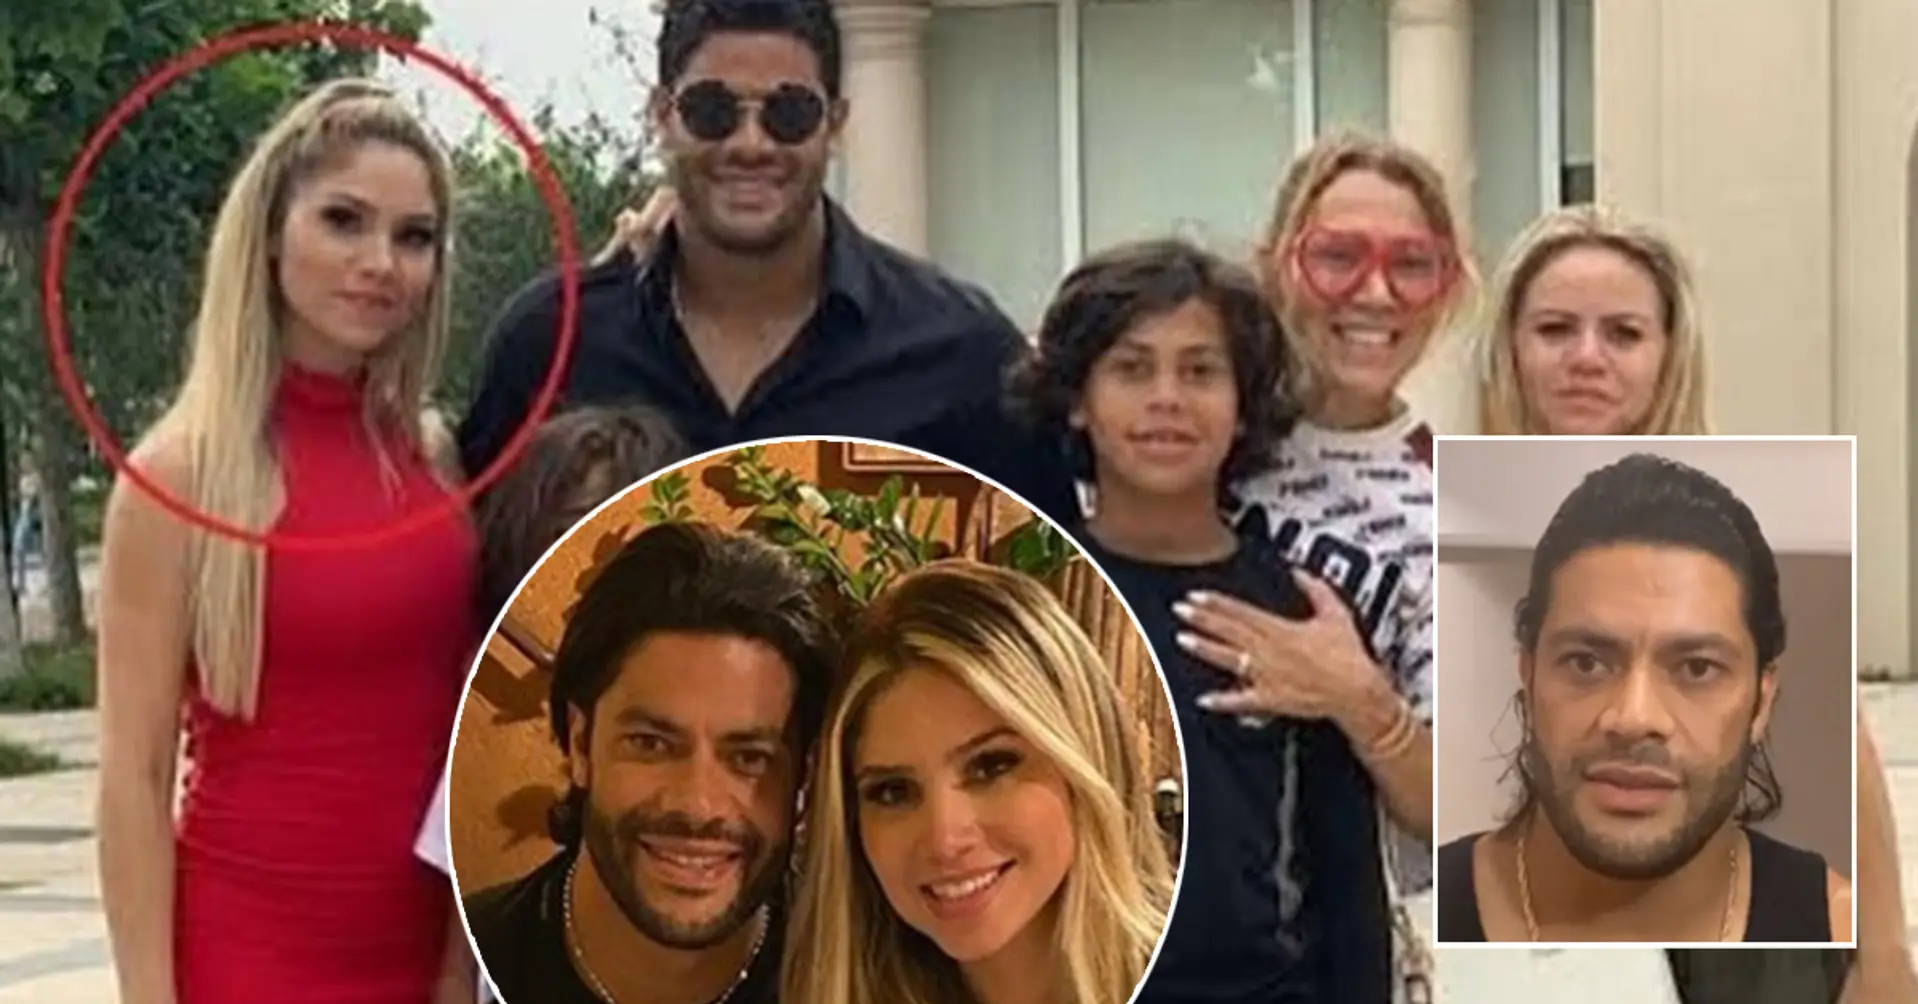 Hulk opens up on leaving wife with 3 kids to date her stunning niece